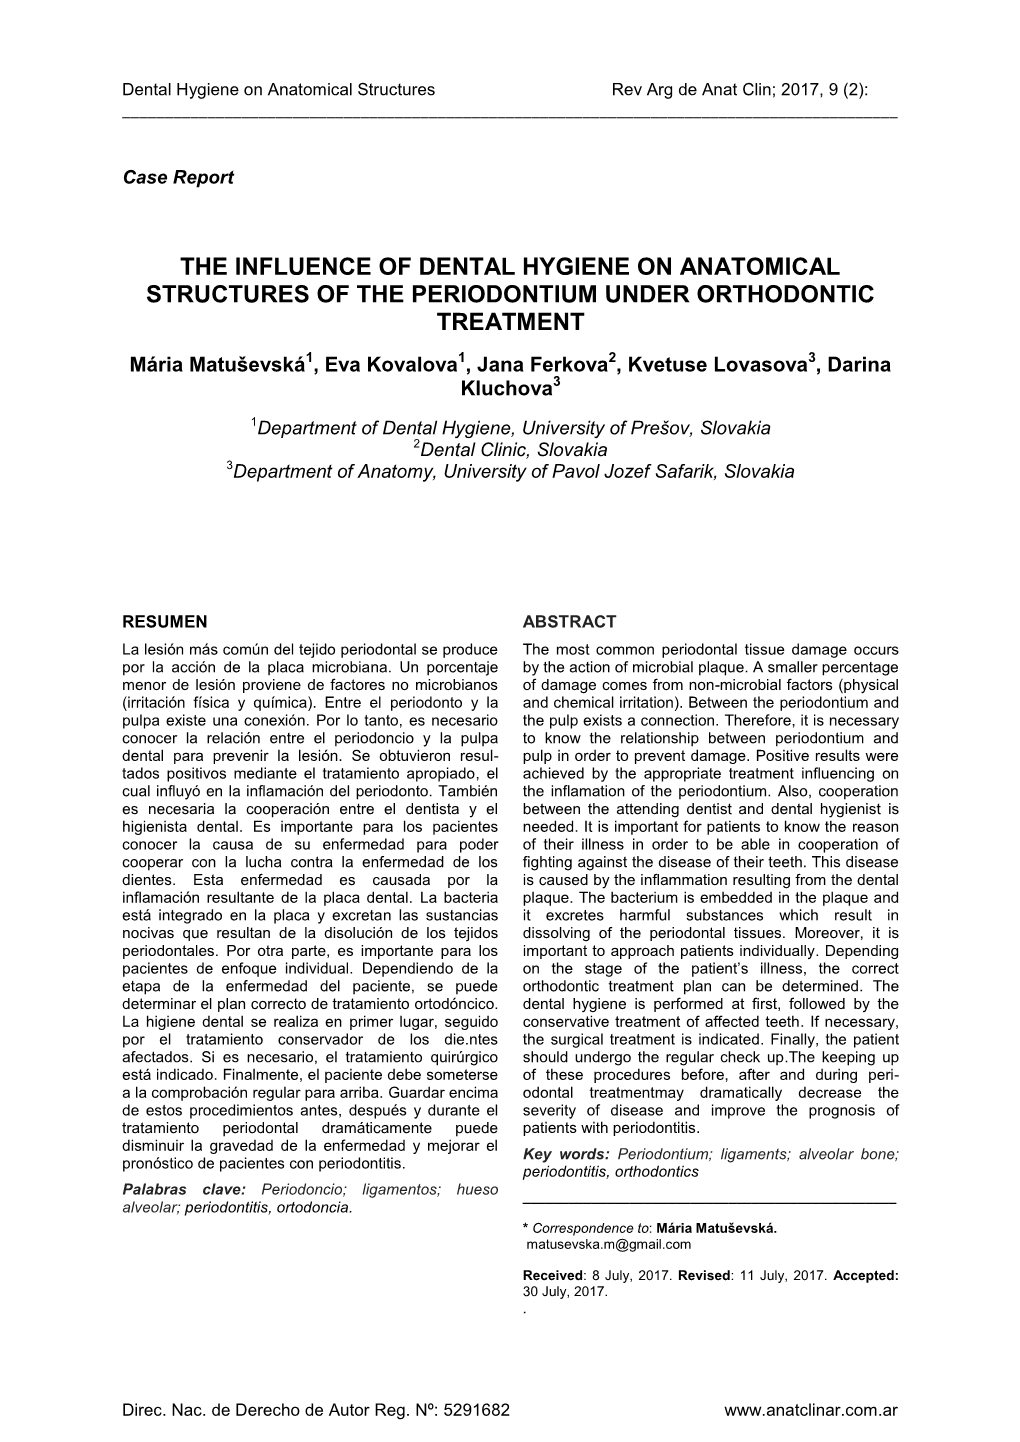 The Influence of Dental Hygiene on Anatomical